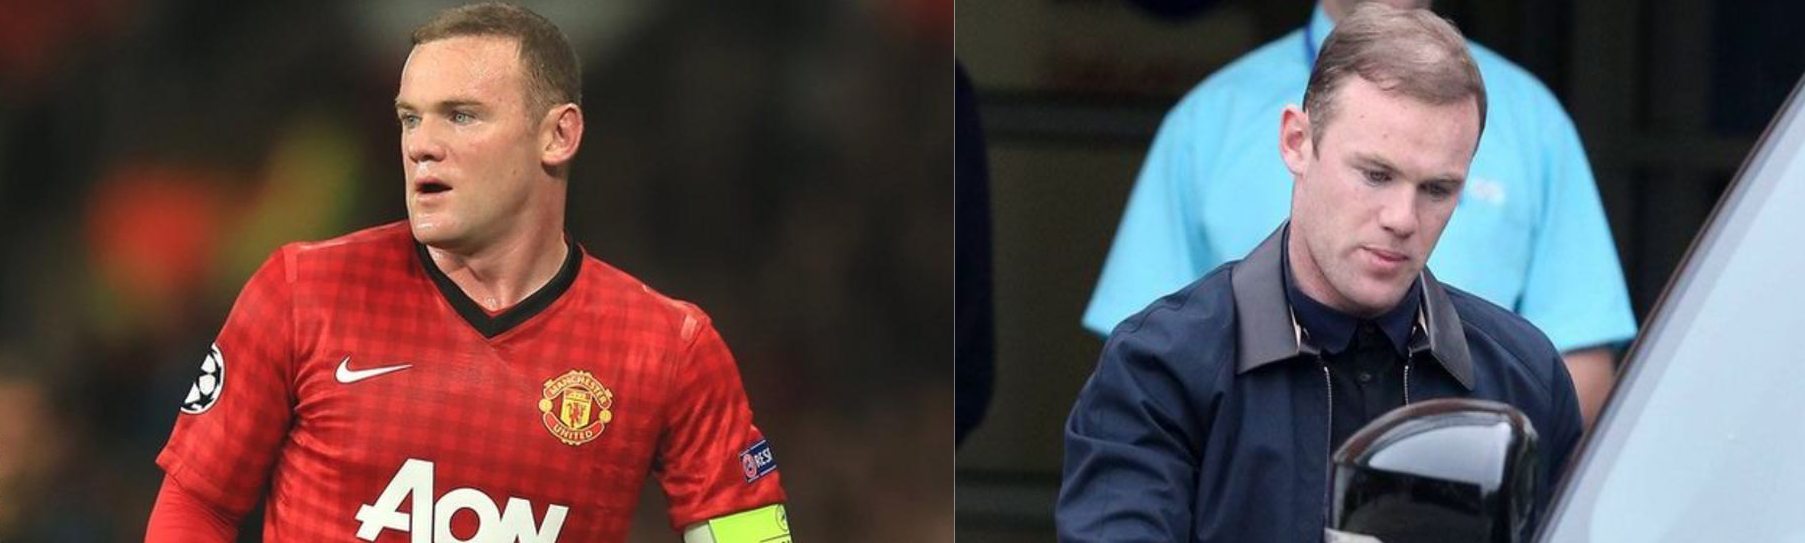 Wayne Rooney's hair in 2012 (left) and in 2013 (right)